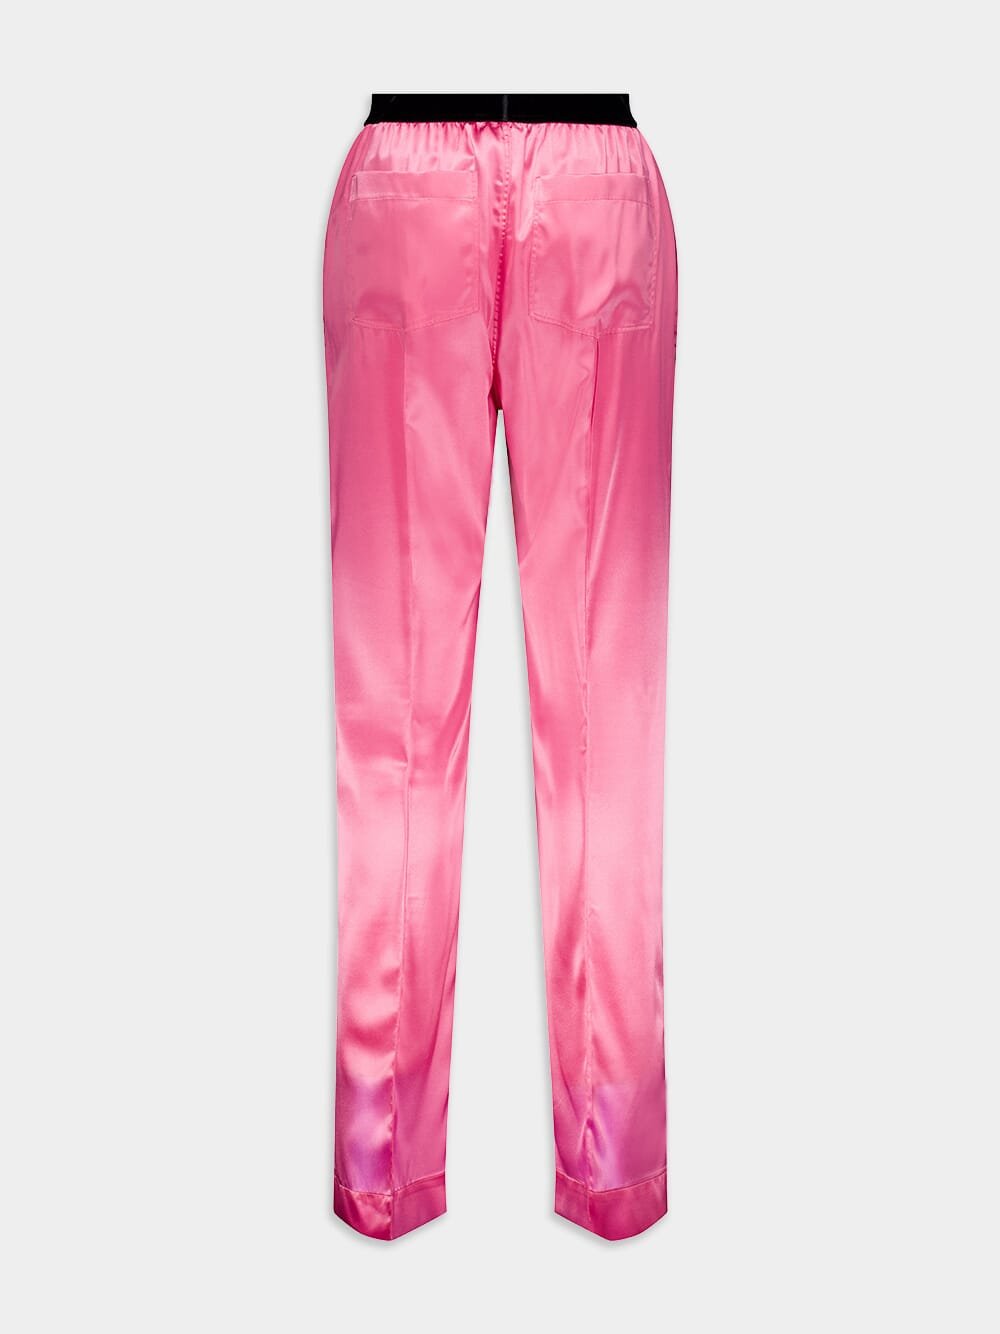 Tom FordStretch Trousers at Fashion Clinic